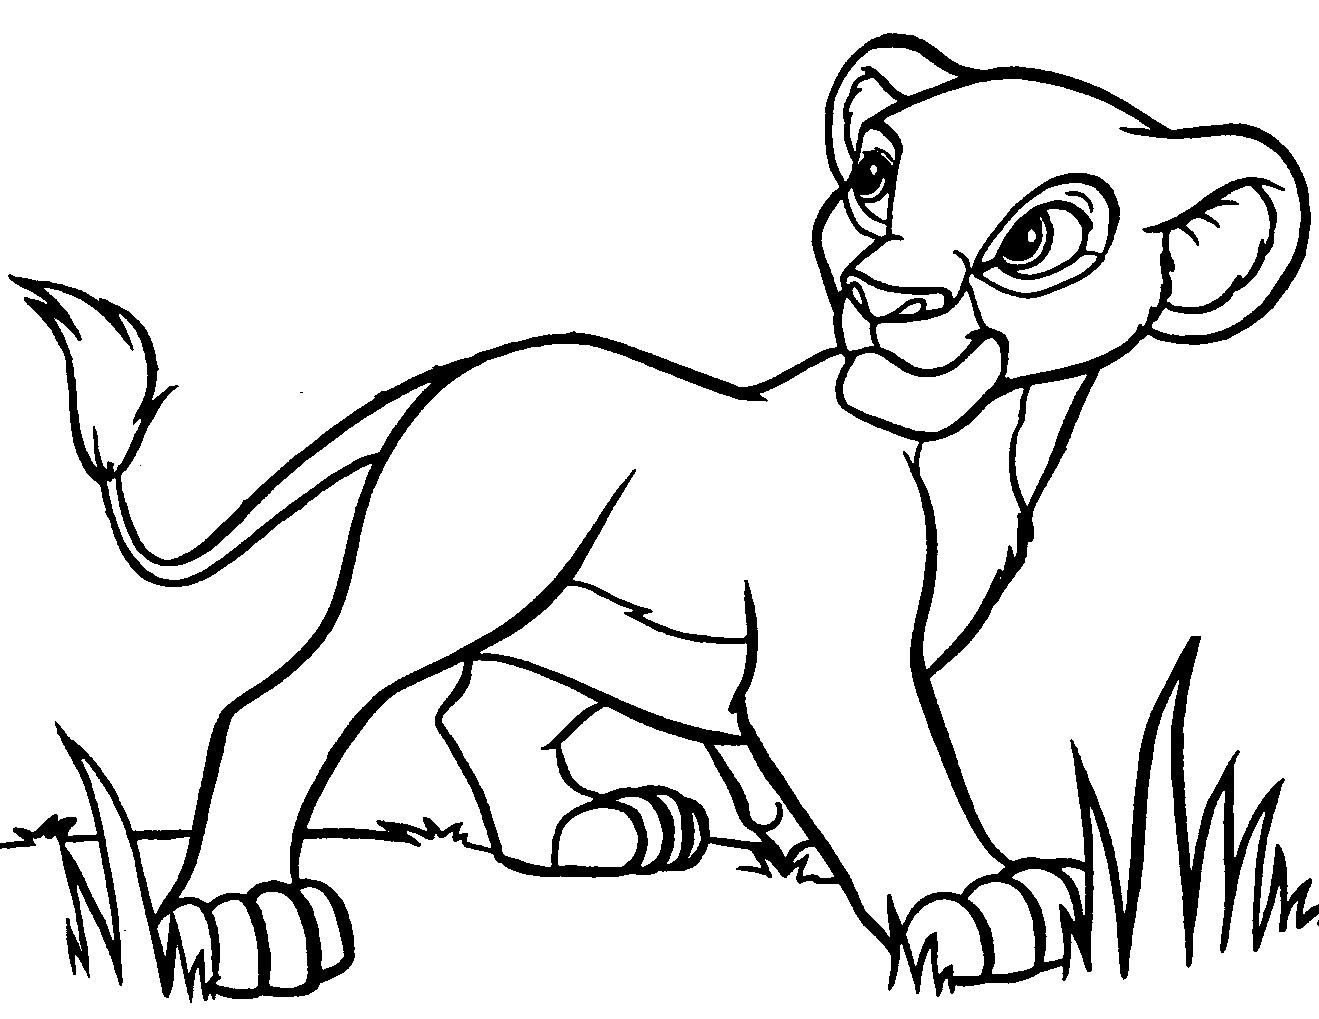 Lion black and white lion king black and white clipart